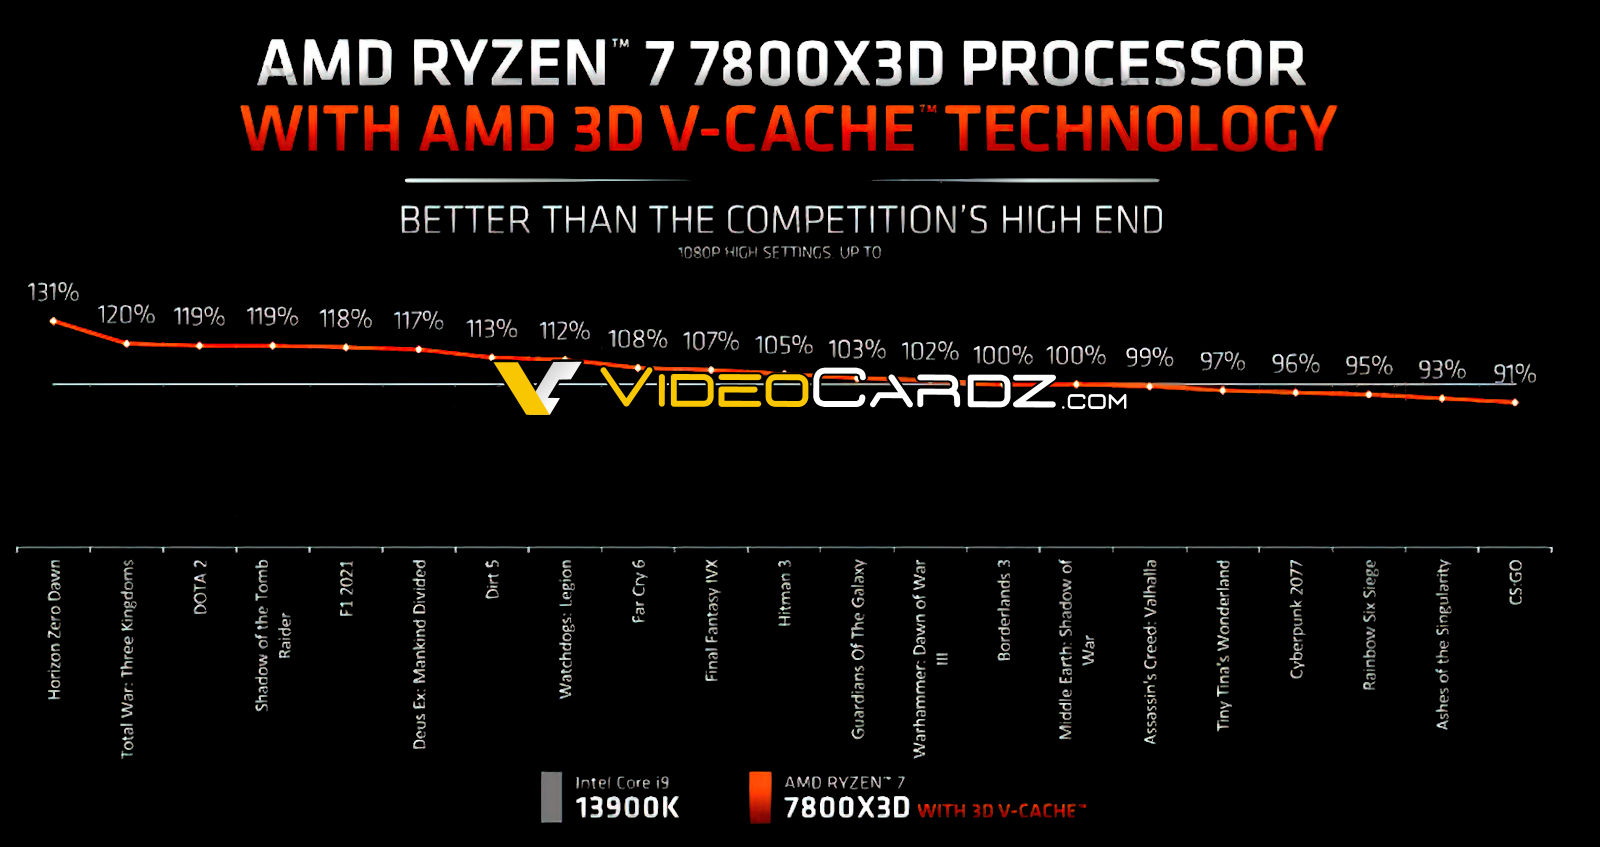 AMD Ryzen 7 7800X3D Gaming Performance Review